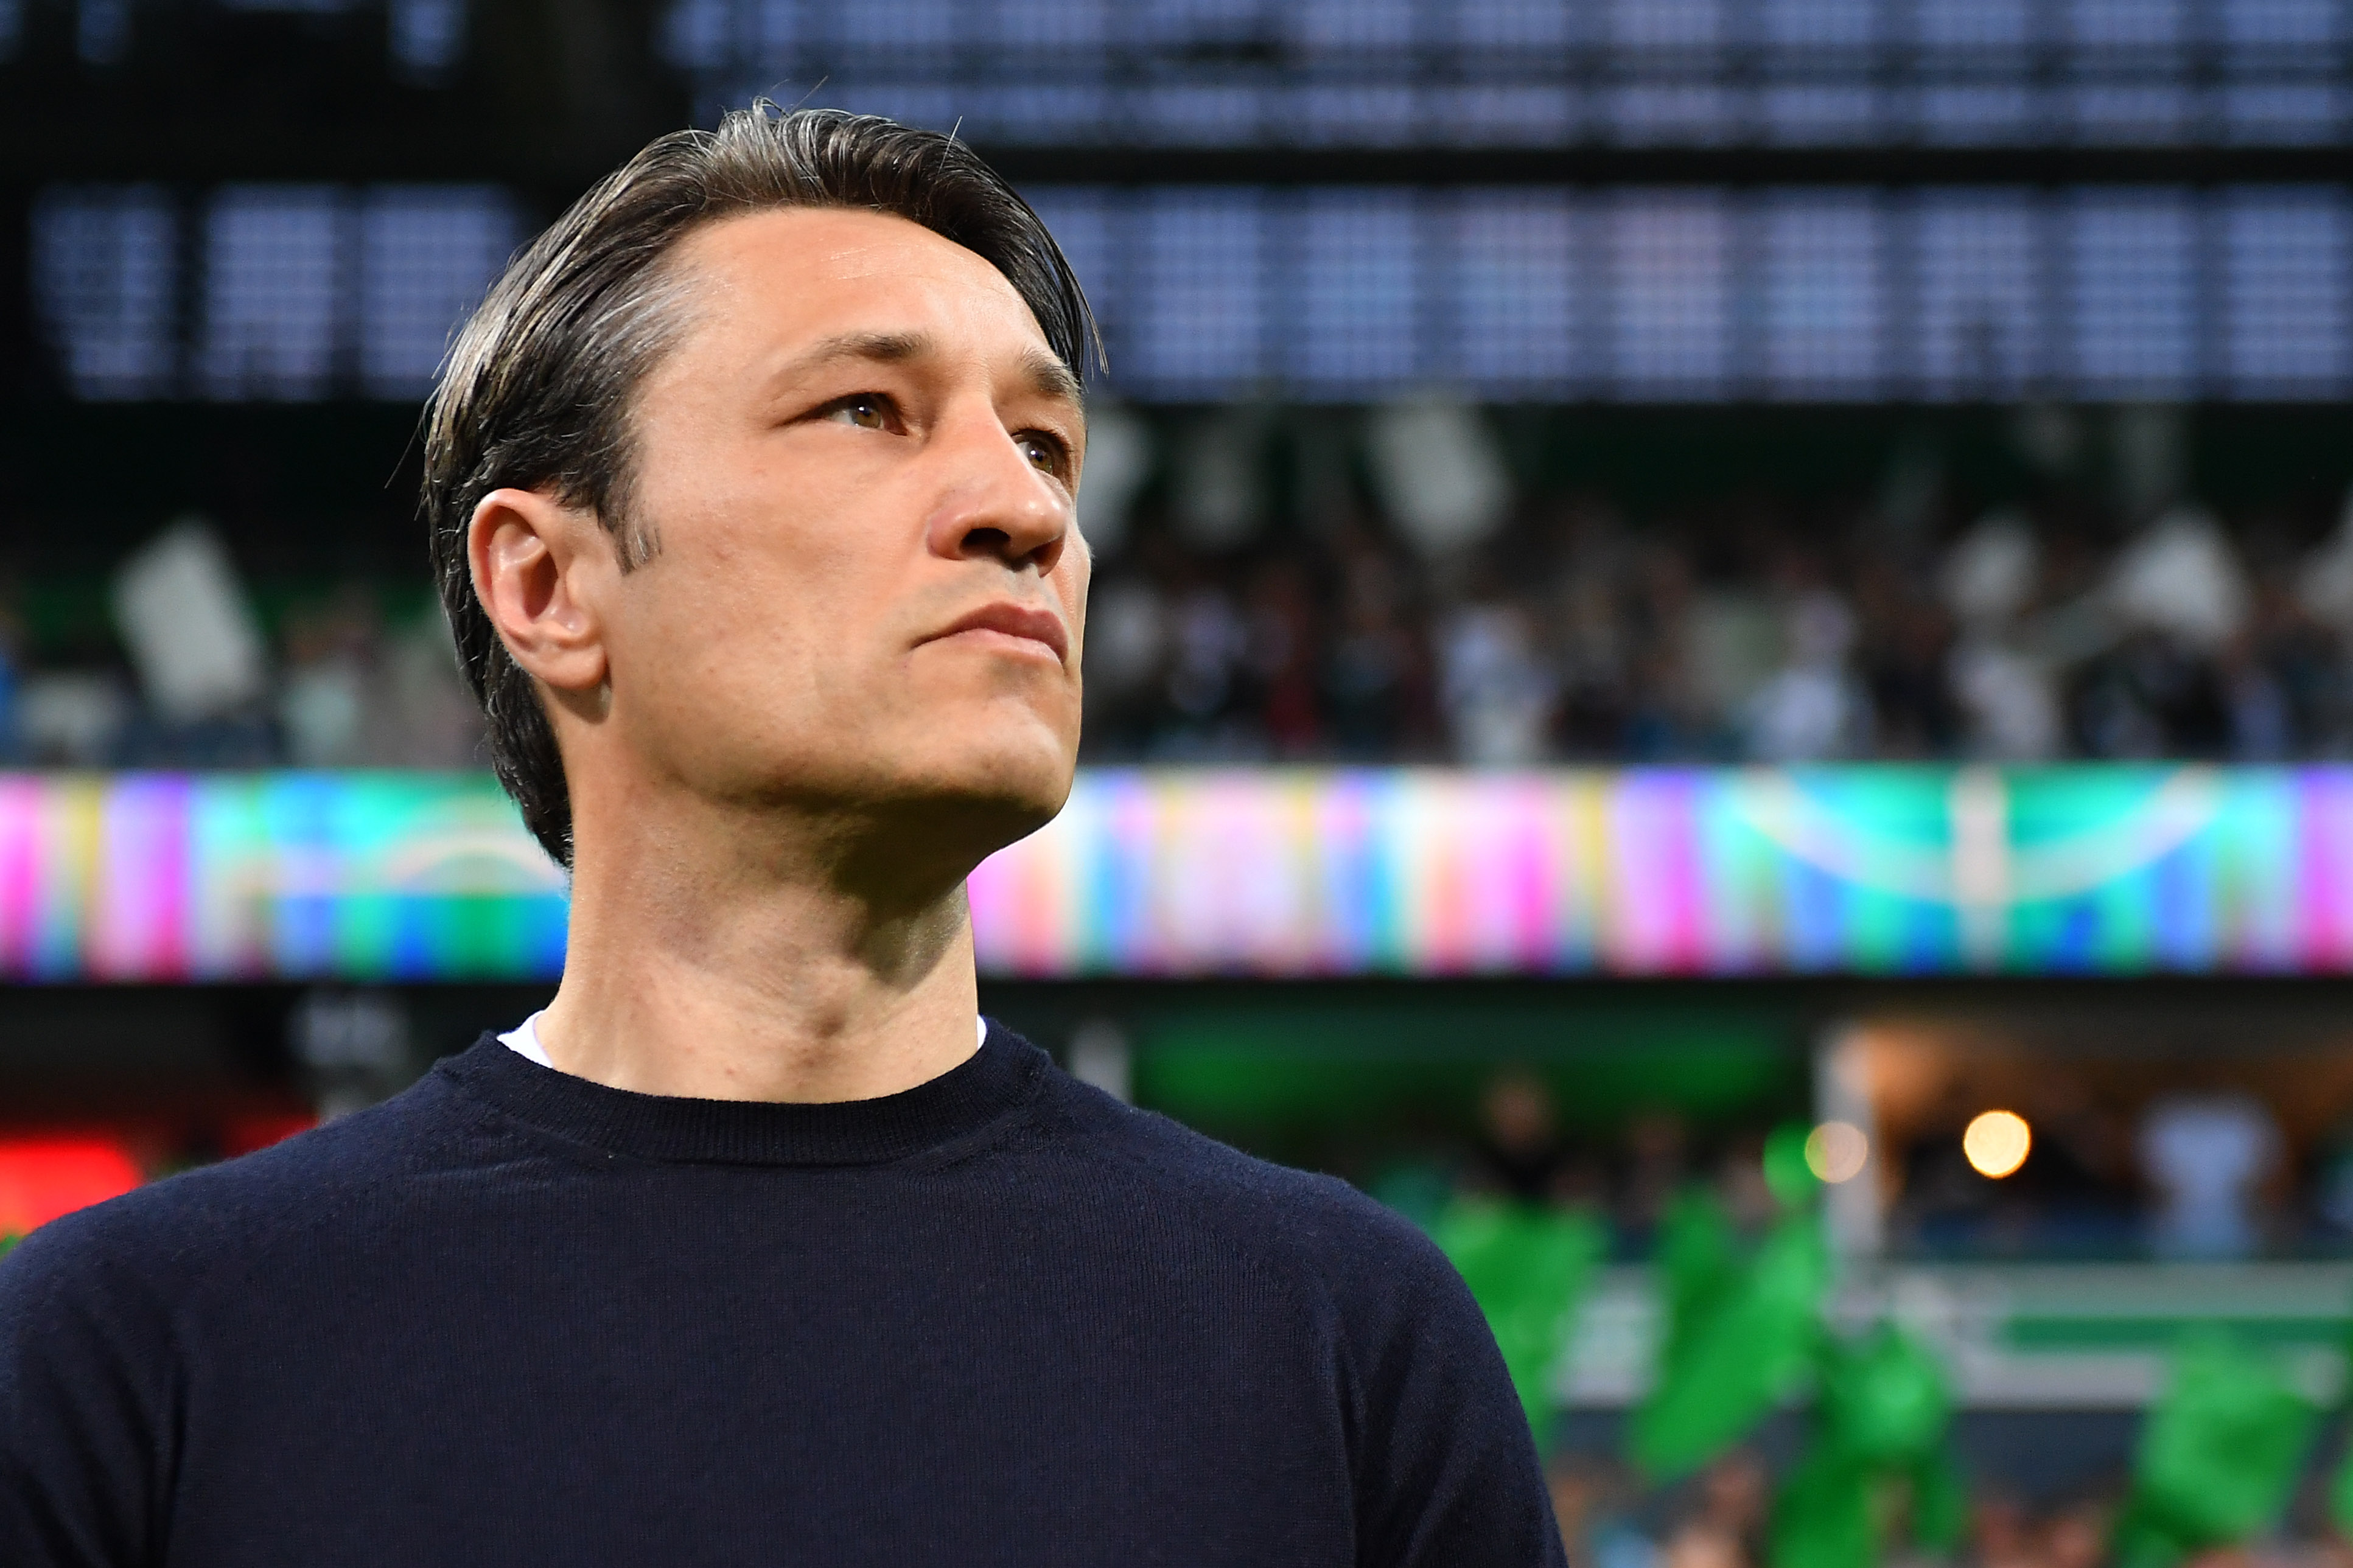 BREMEN, GERMANY - APRIL 24: Niko Kovac head coach of Munich looks on prior to the DFB Cup semi final match between Werder Bremen and FC Bayern Muenchen at Weserstadion on April 24, 2019 in Bremen, Germany. (Photo by Stuart Franklin/Bongarts/Getty Images)